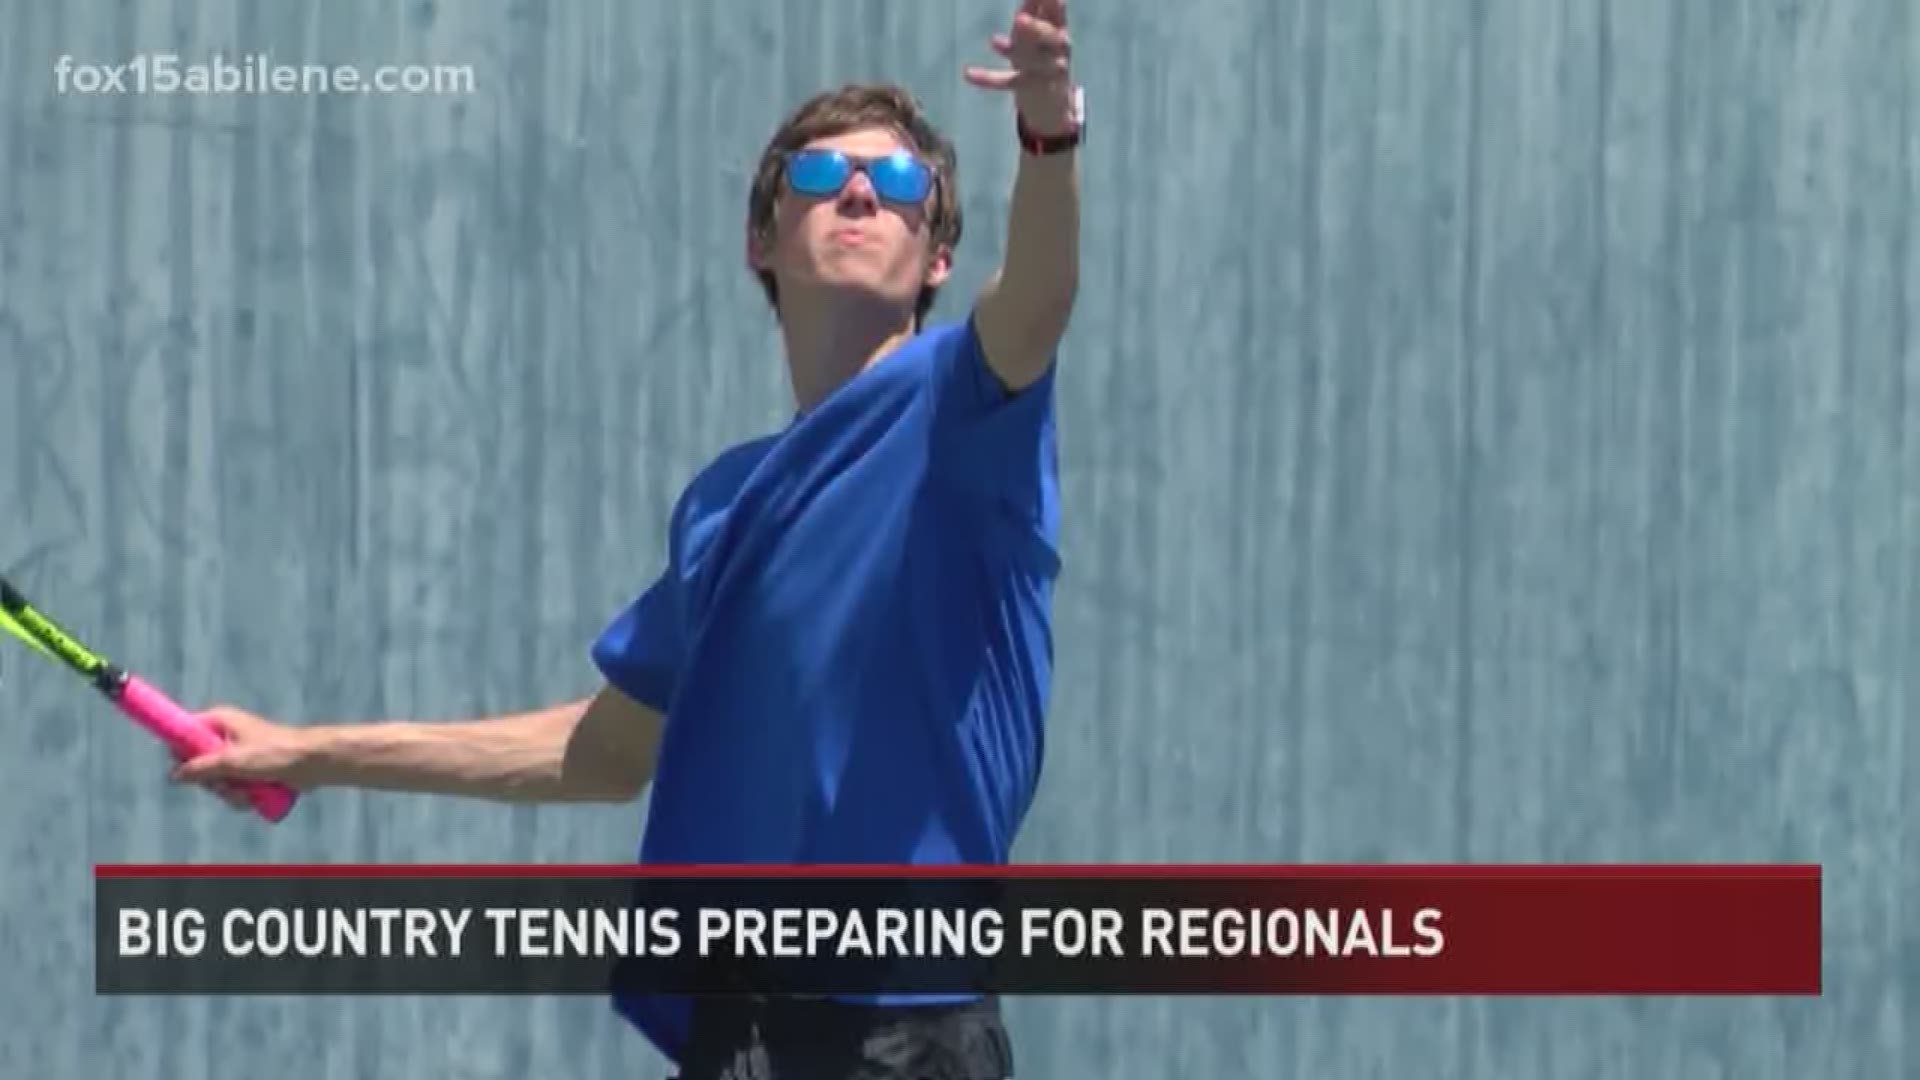 A host of tennis squads from around the Big Country were at Cooper High School preparing for Regional playoffs that start next week.